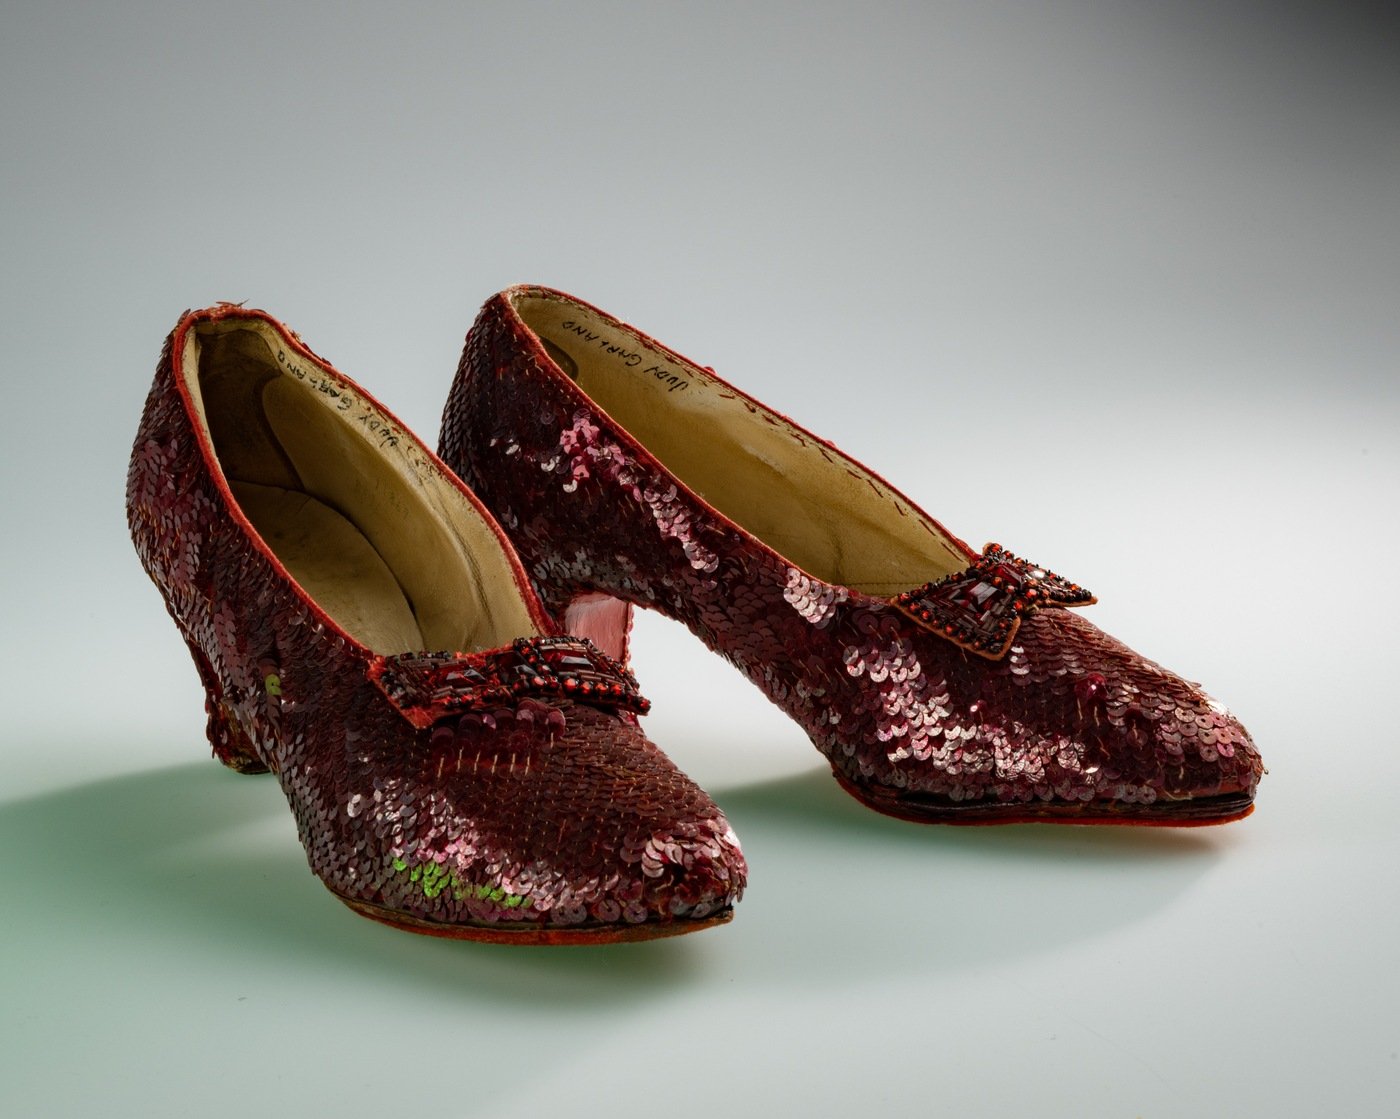 This is a close-up photo of the so-called "traveling pair" of iconic sequined shoes—one of at least four pairs used in "The Wizard of Oz" that are still in existence—that were recently returned to their owner, Michael Shaw, in an emotional reunion.